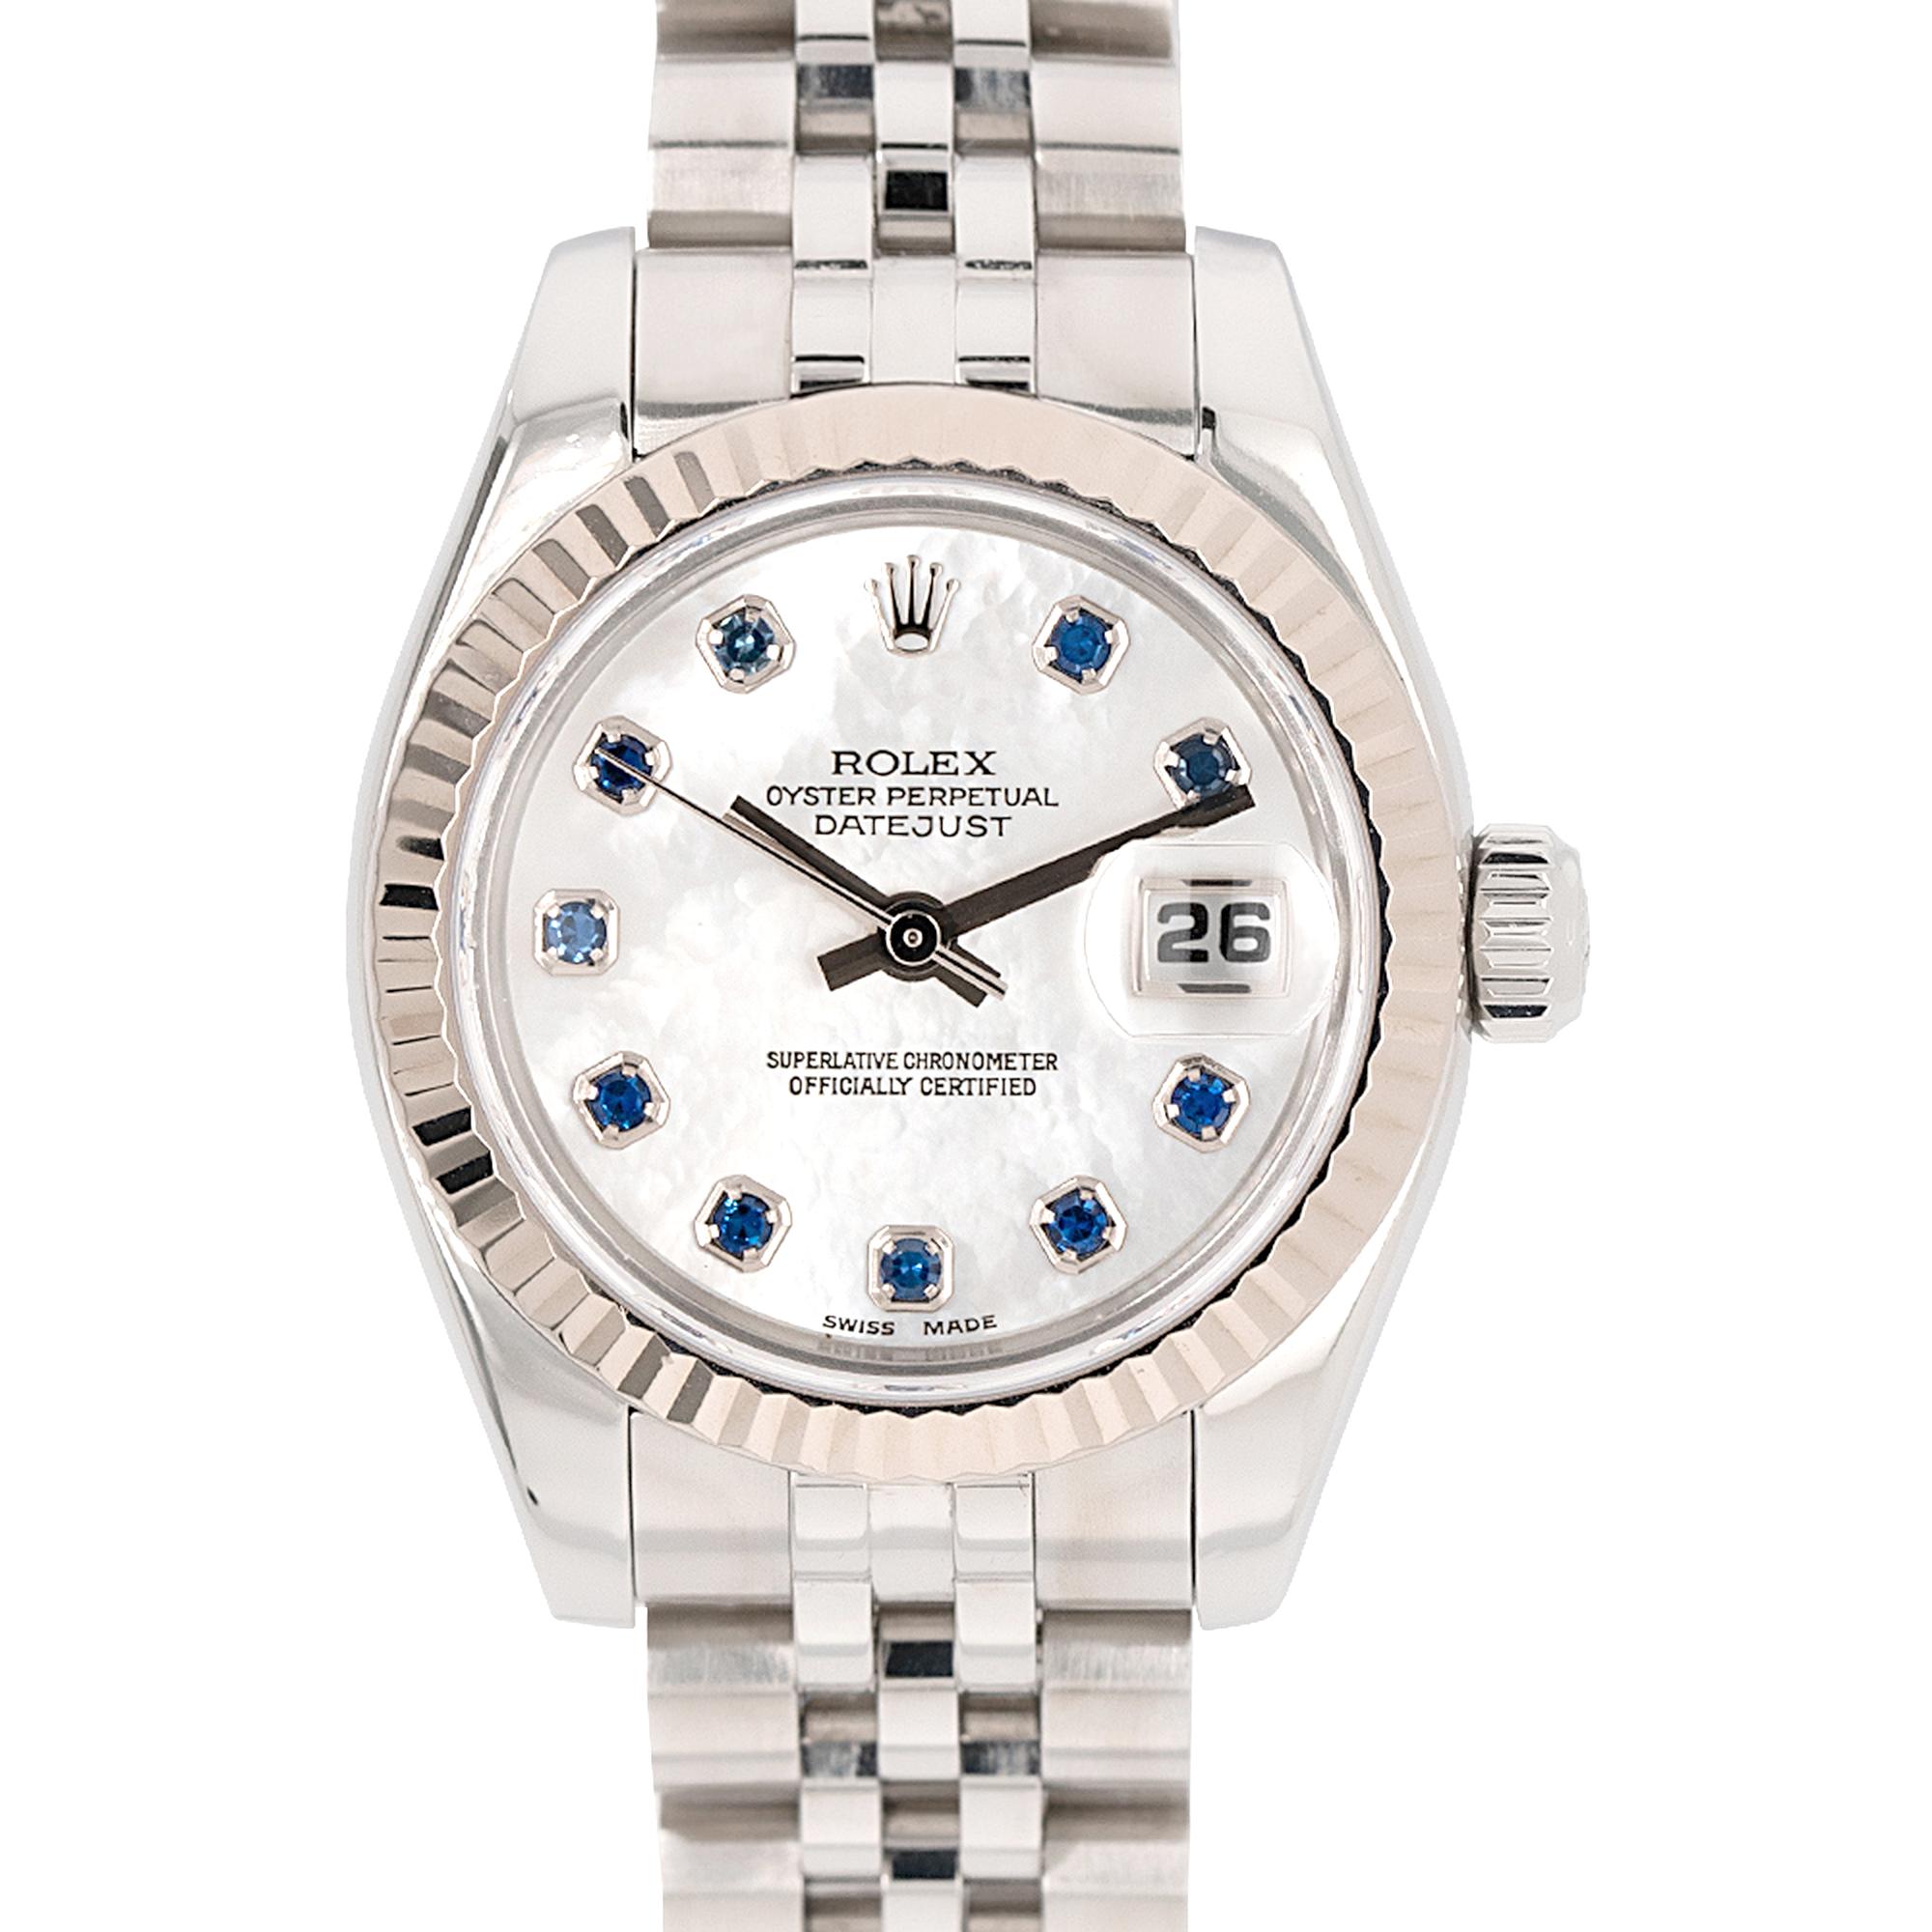 Brand: Rolex
MPN: 179174NGS
Model: Datejust
Case Material: Stainless steel
Case Diameter: 26mm
Crystal: Scratch resistant sapphire
Bezel:: 18k white gold bezel
Dial: Mother of pearl dial with sapphire hour markers and silver hands. Date can be found